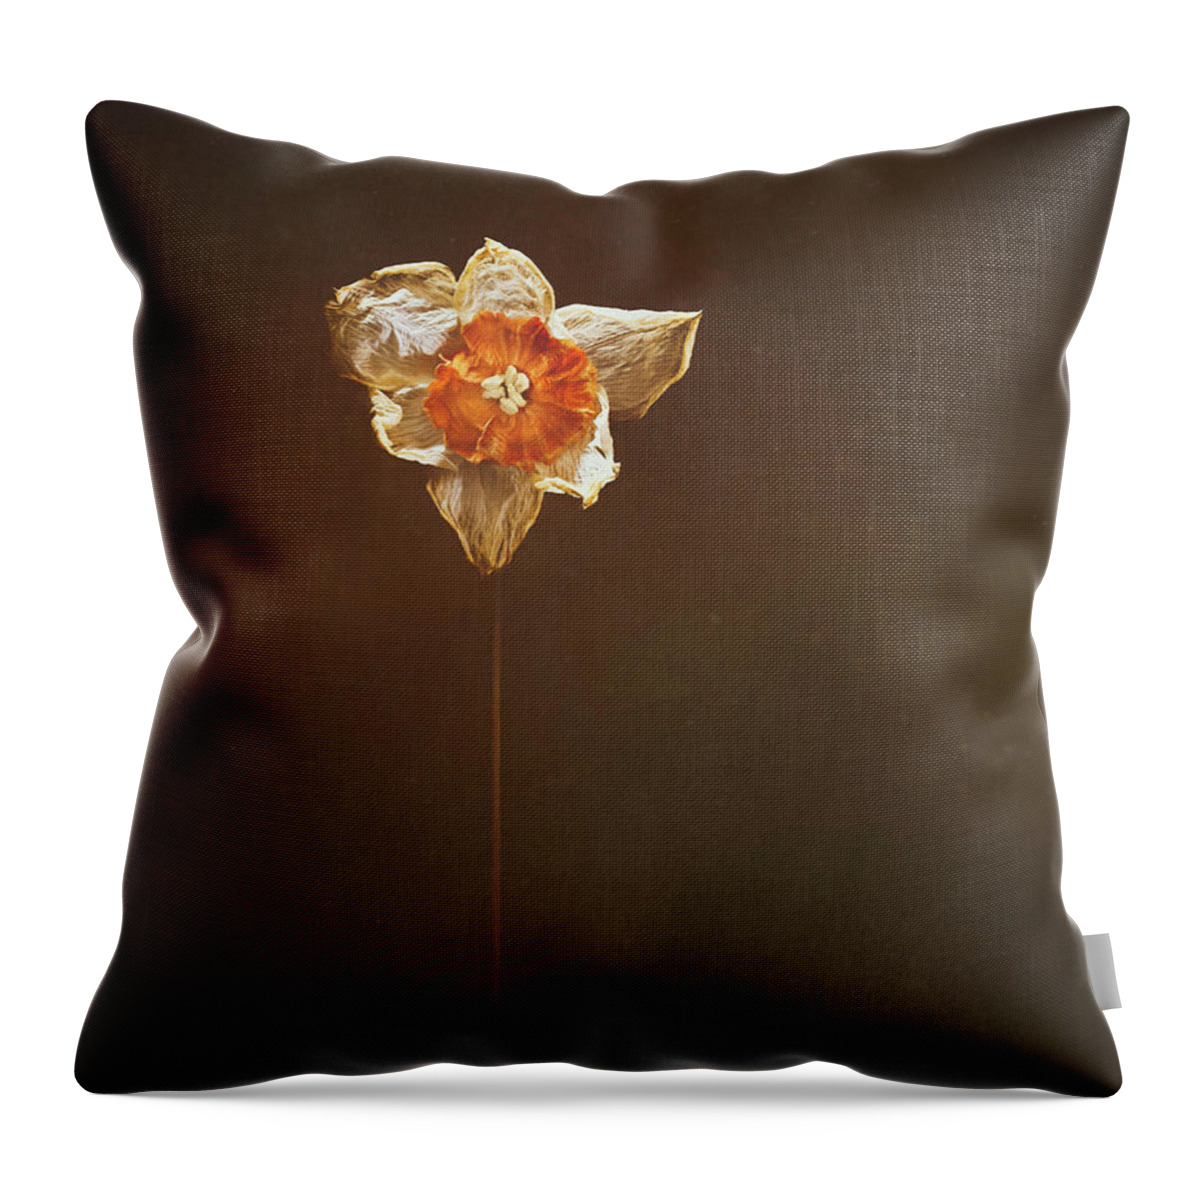 Daffodil Throw Pillow featuring the photograph Dried Daffodil by Scott Norris